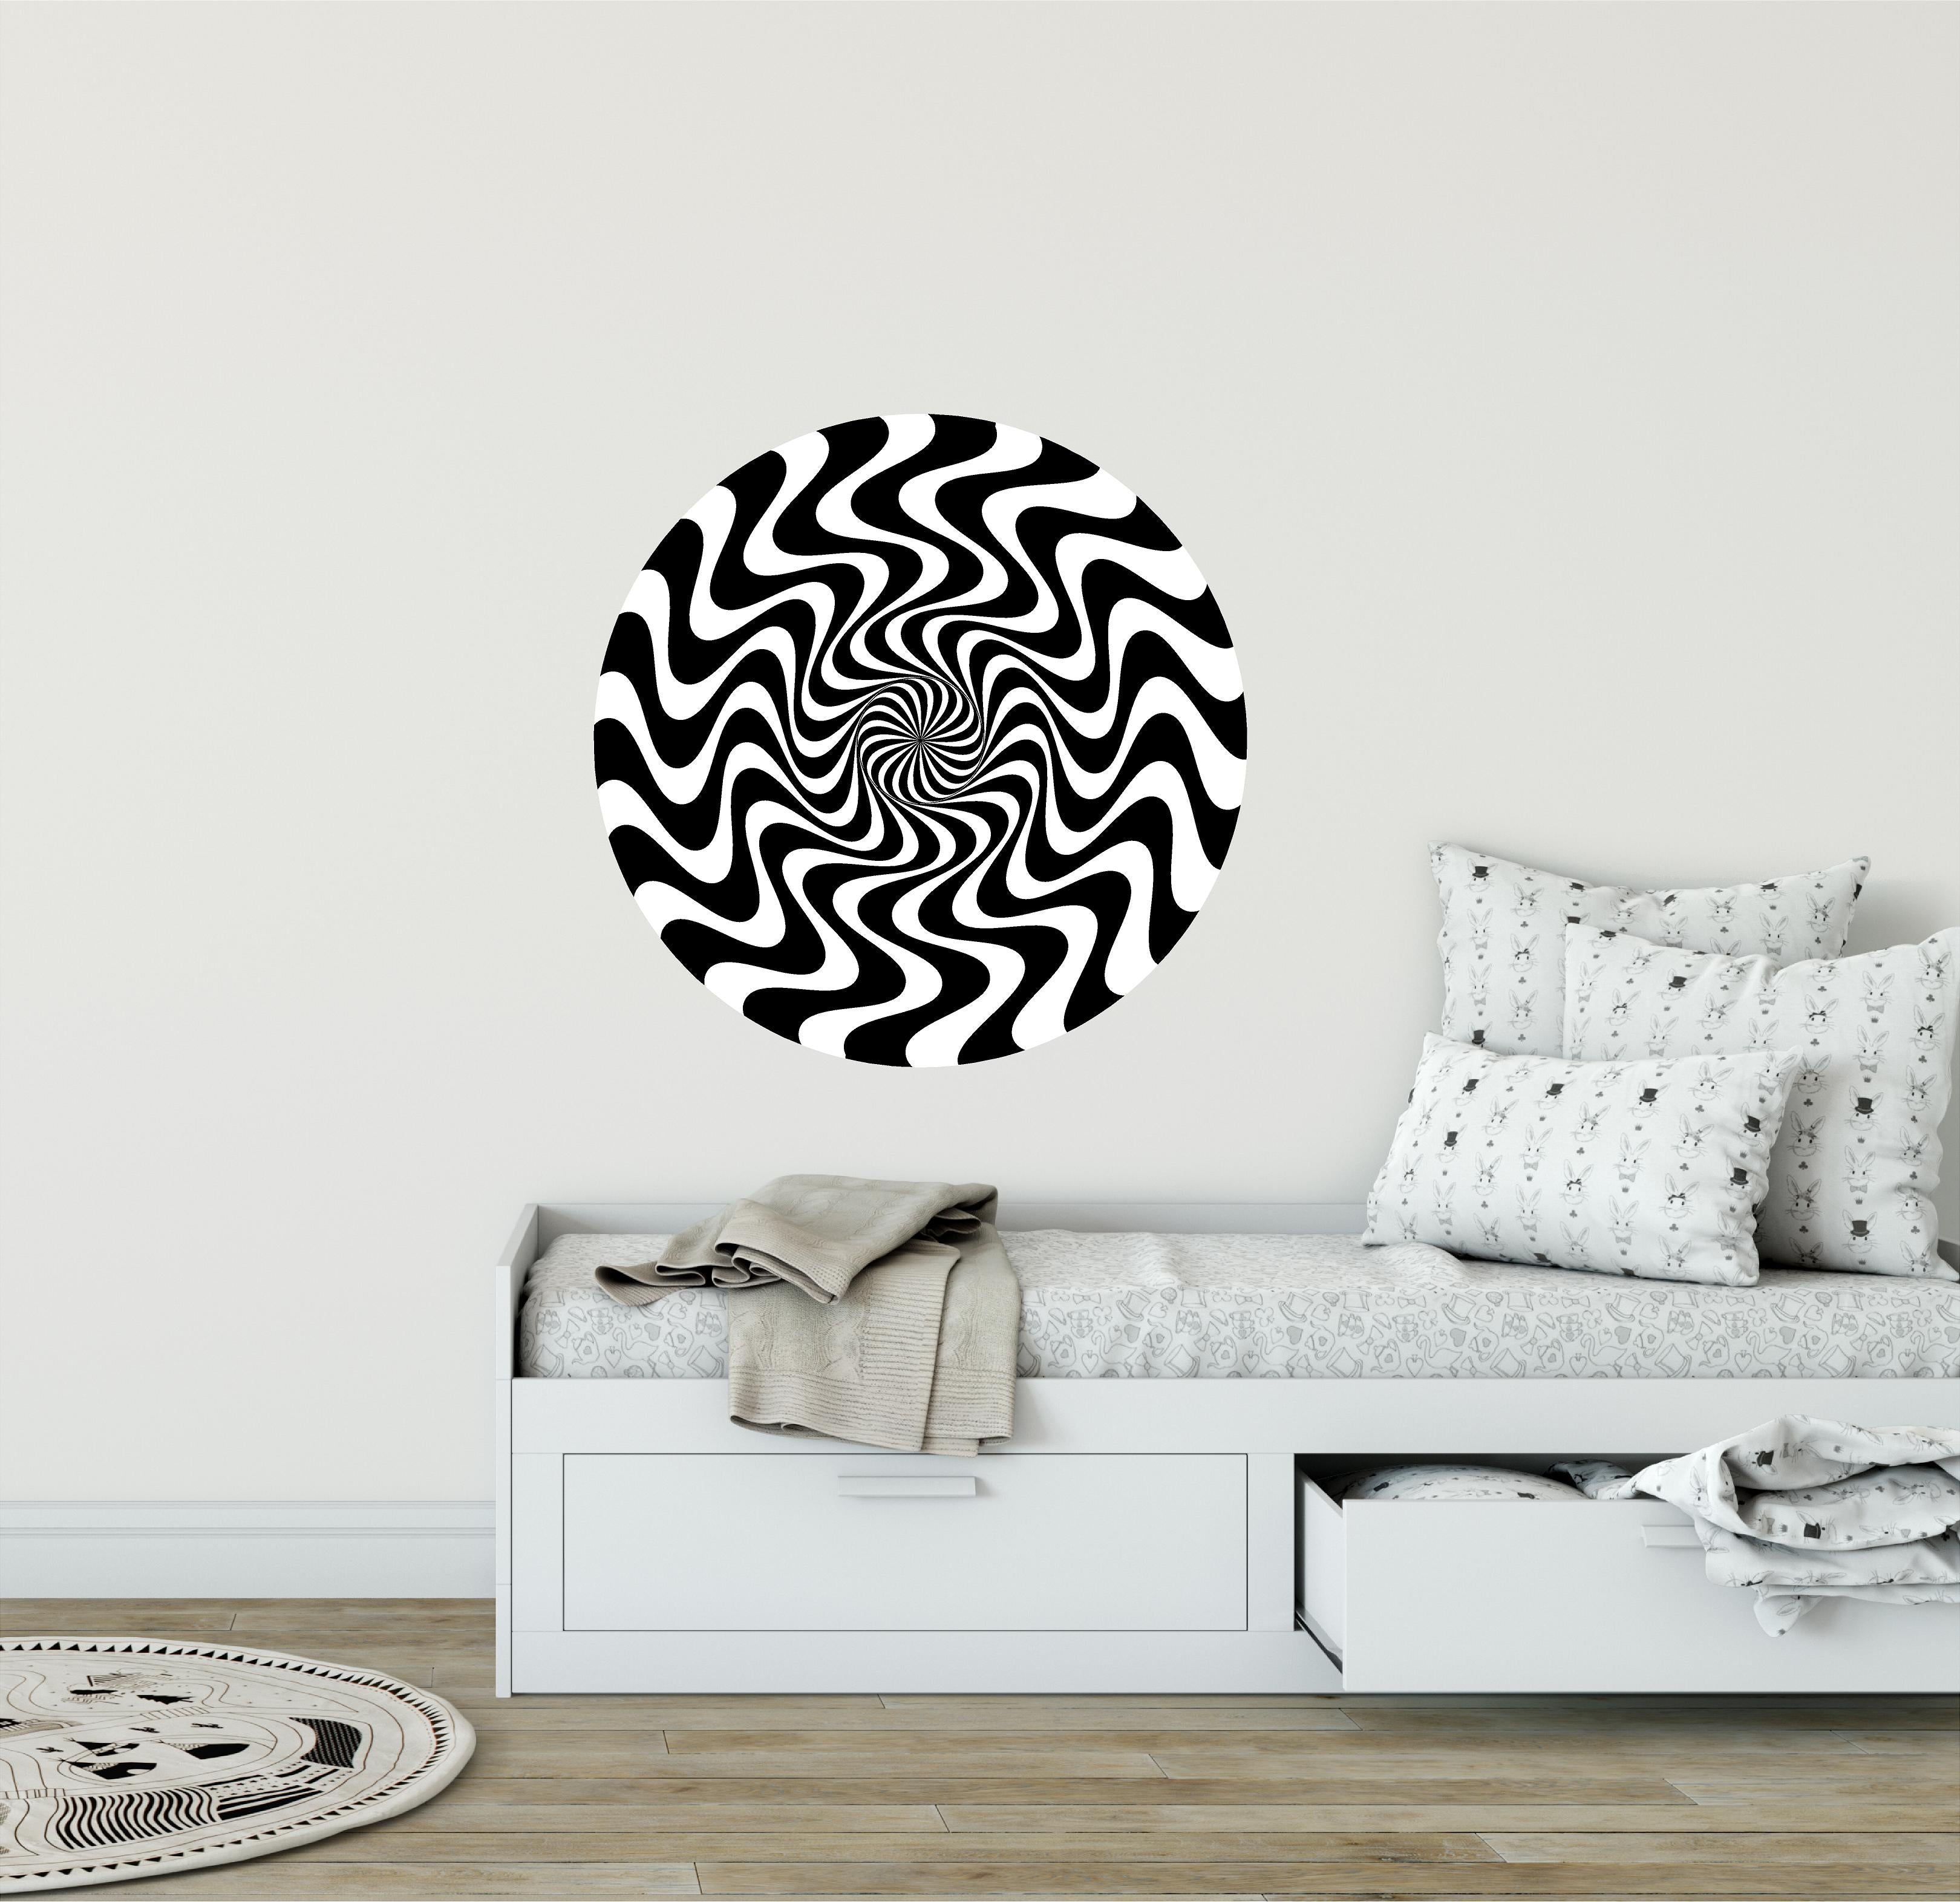 Hypnotic Spiral #5 Wall Decal Removable Fabric Vinyl Wall Sticker | DecalBaby